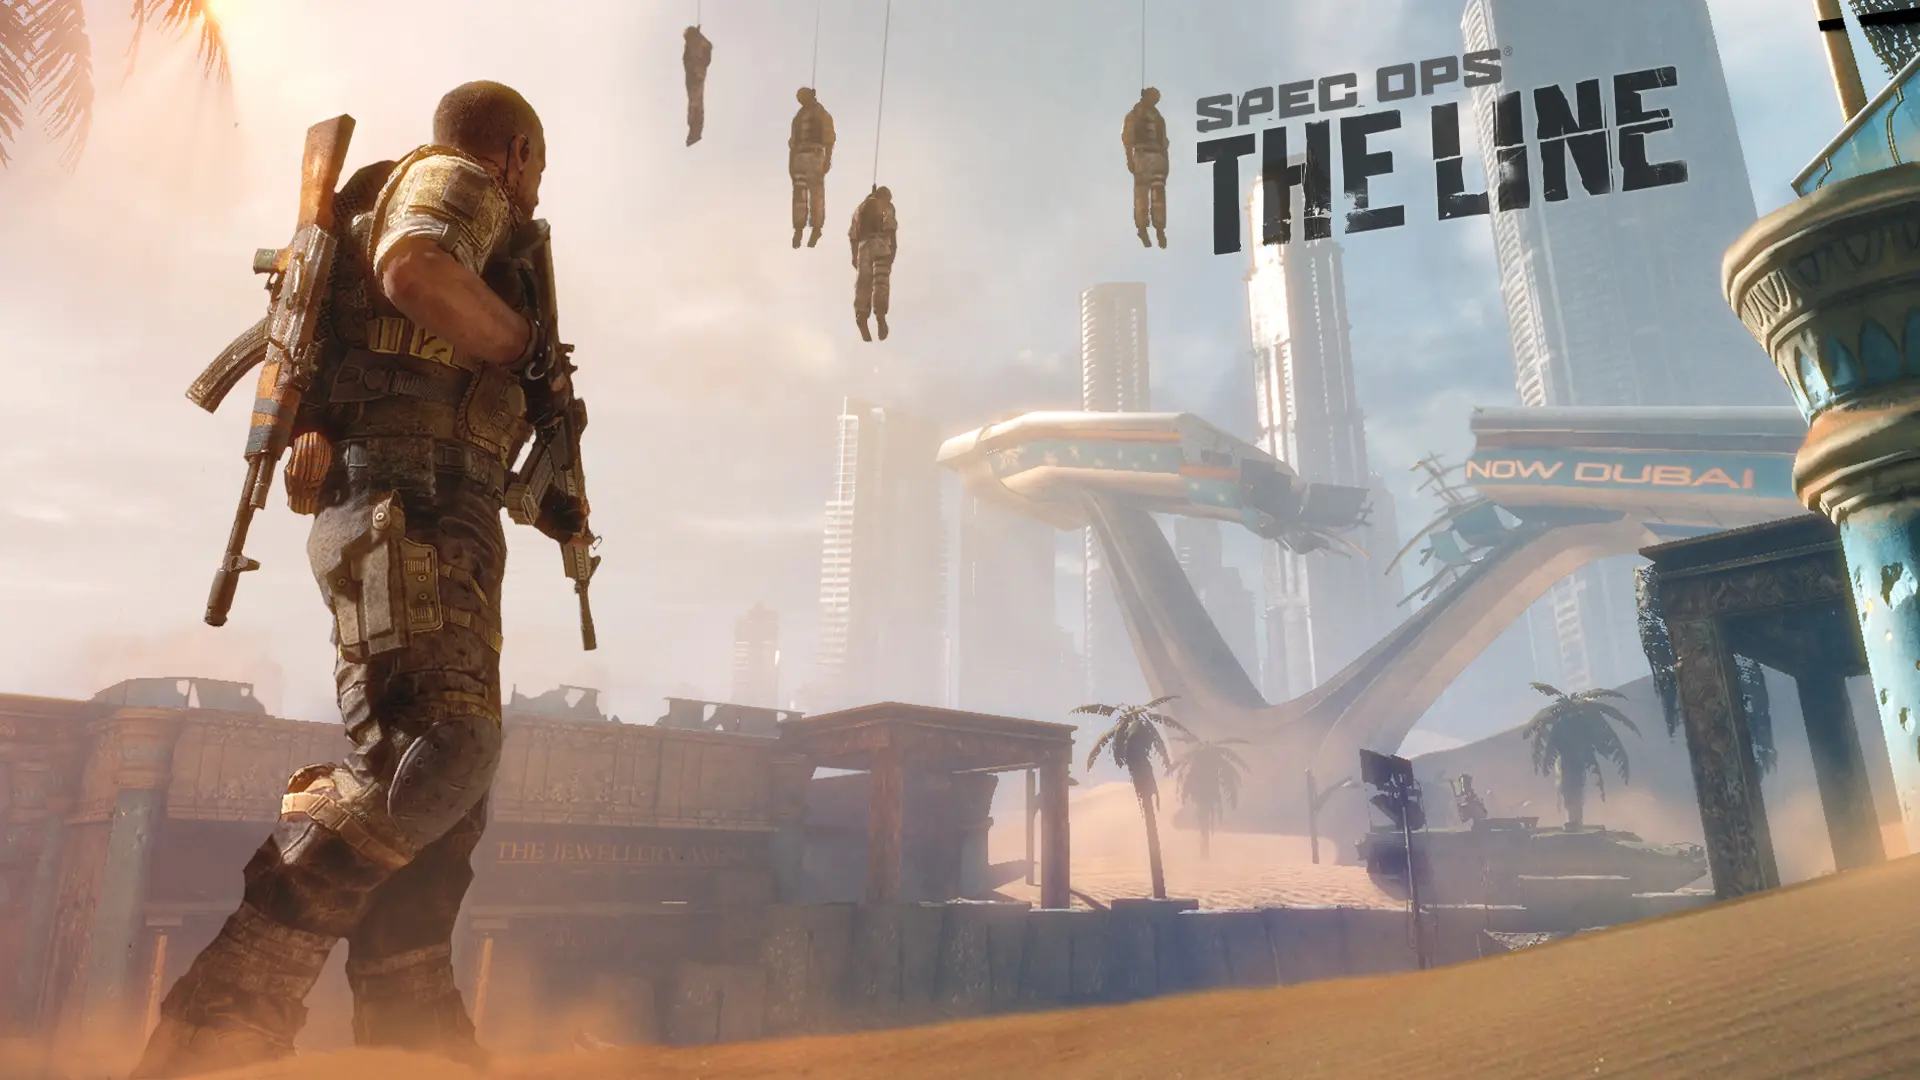 Game Spec Ops The Line wallpaper 4 | Background Image